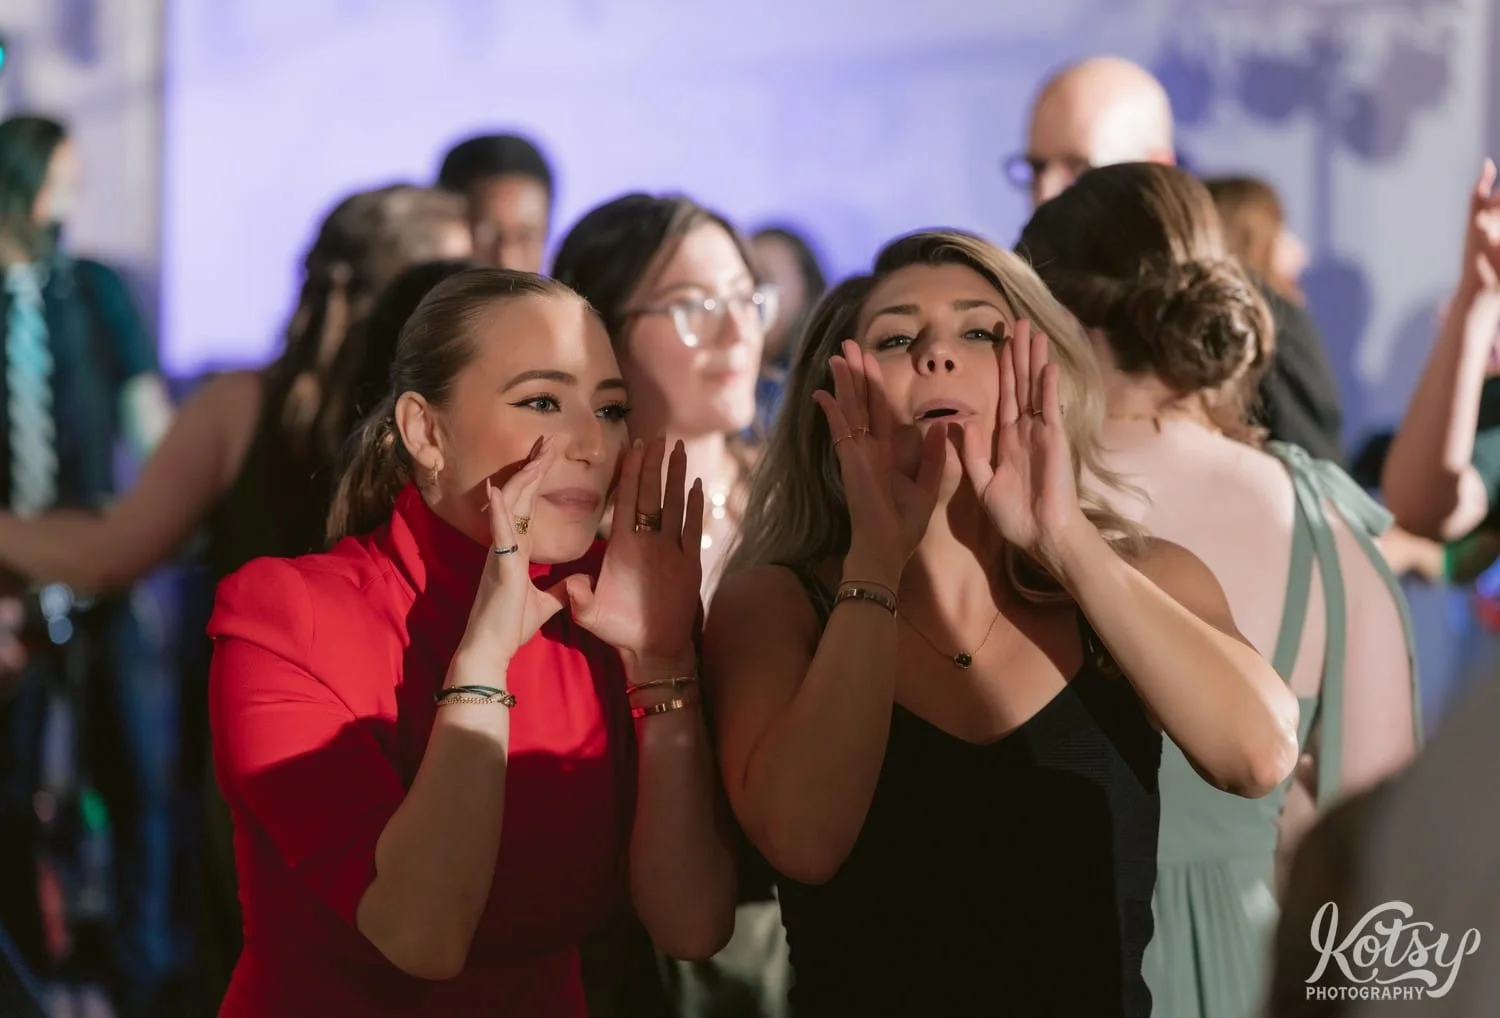 Two women are seen yelling something with arms around their mouths during a Second Floor Events wedding reception in Toronto, Canada.